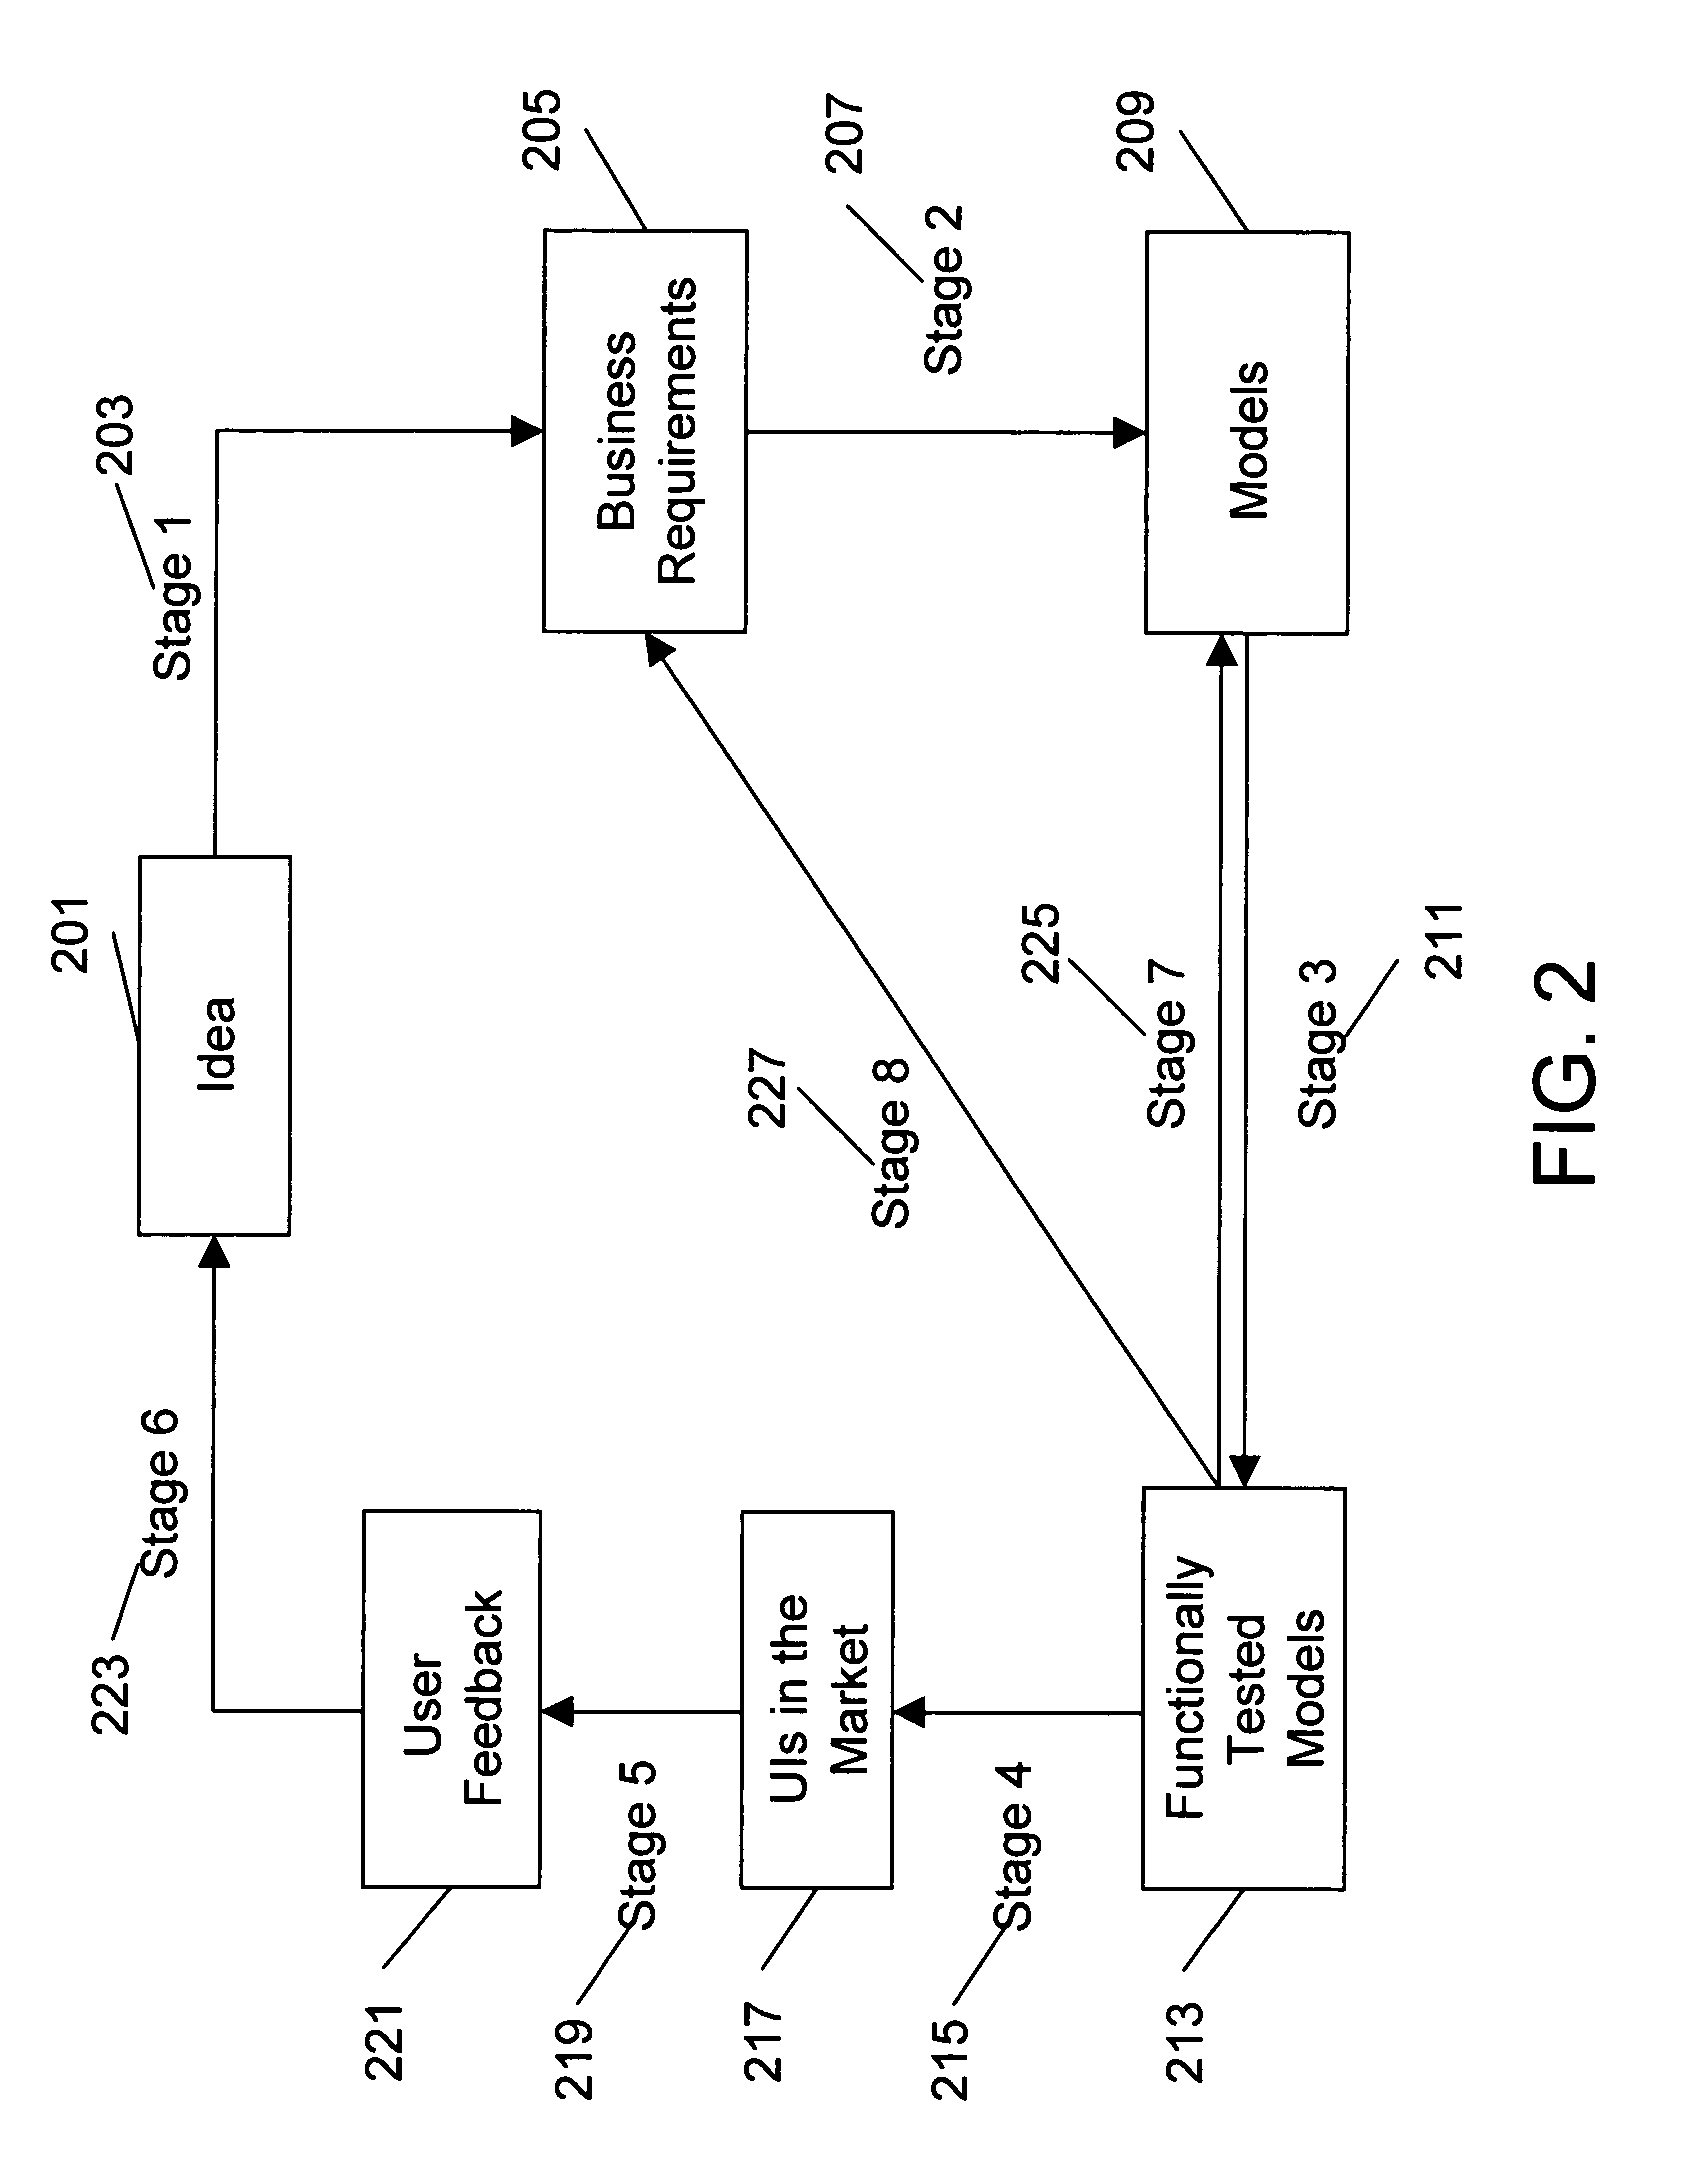 System and method for developing user interfaces purely by modeling as meta data in software application